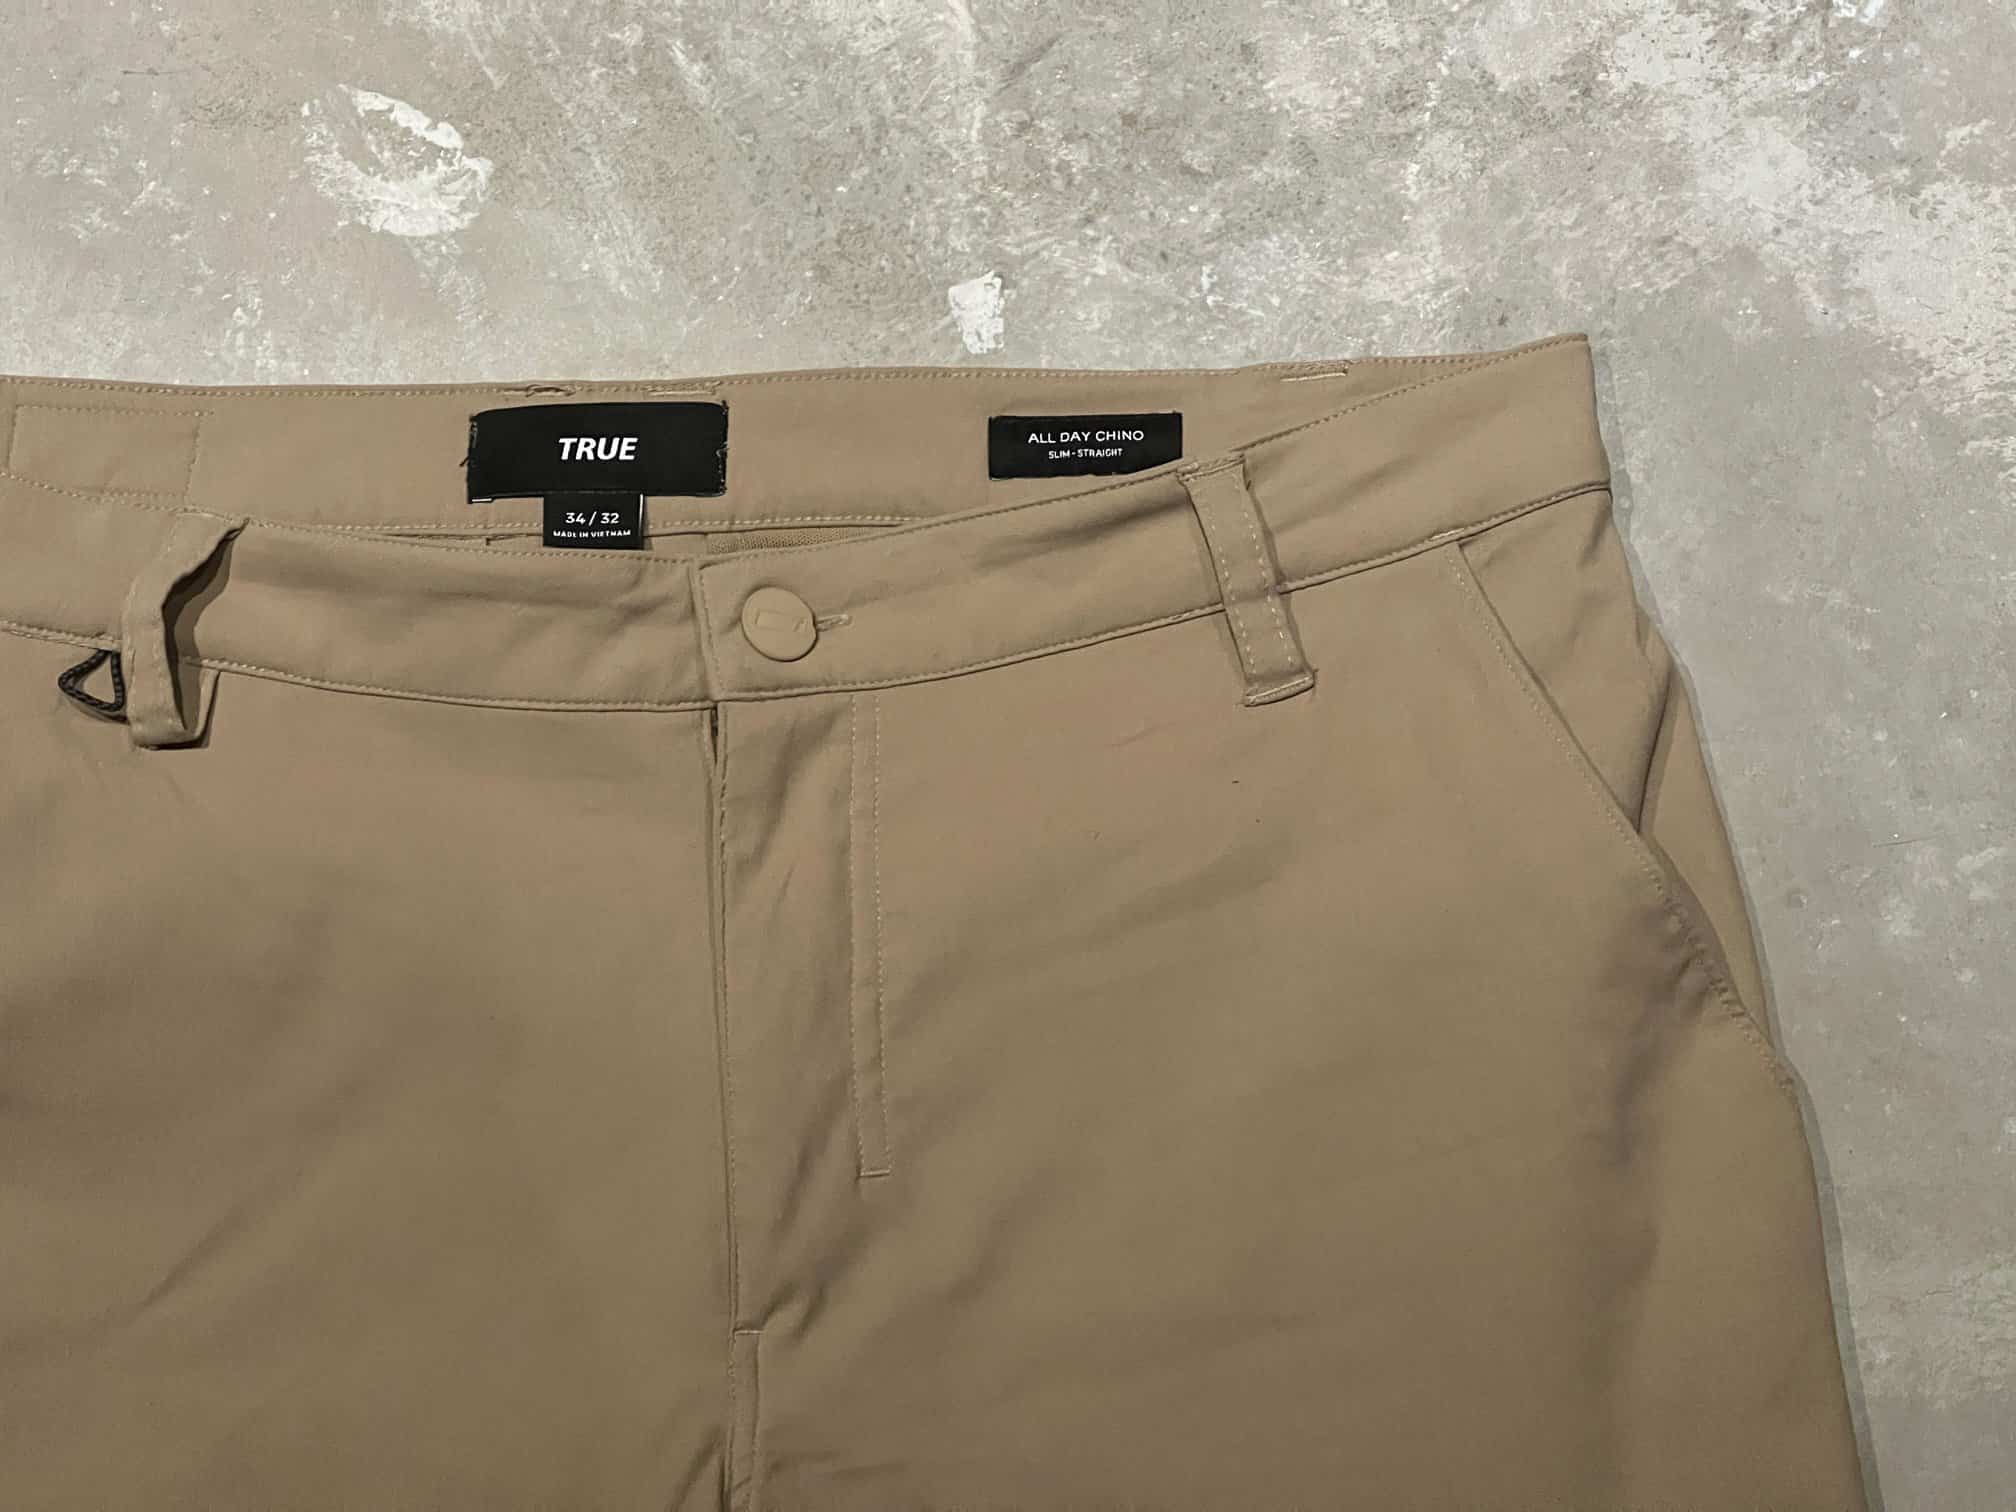 TRUE All Day Chino Pants Review - Independent Golf Reviews